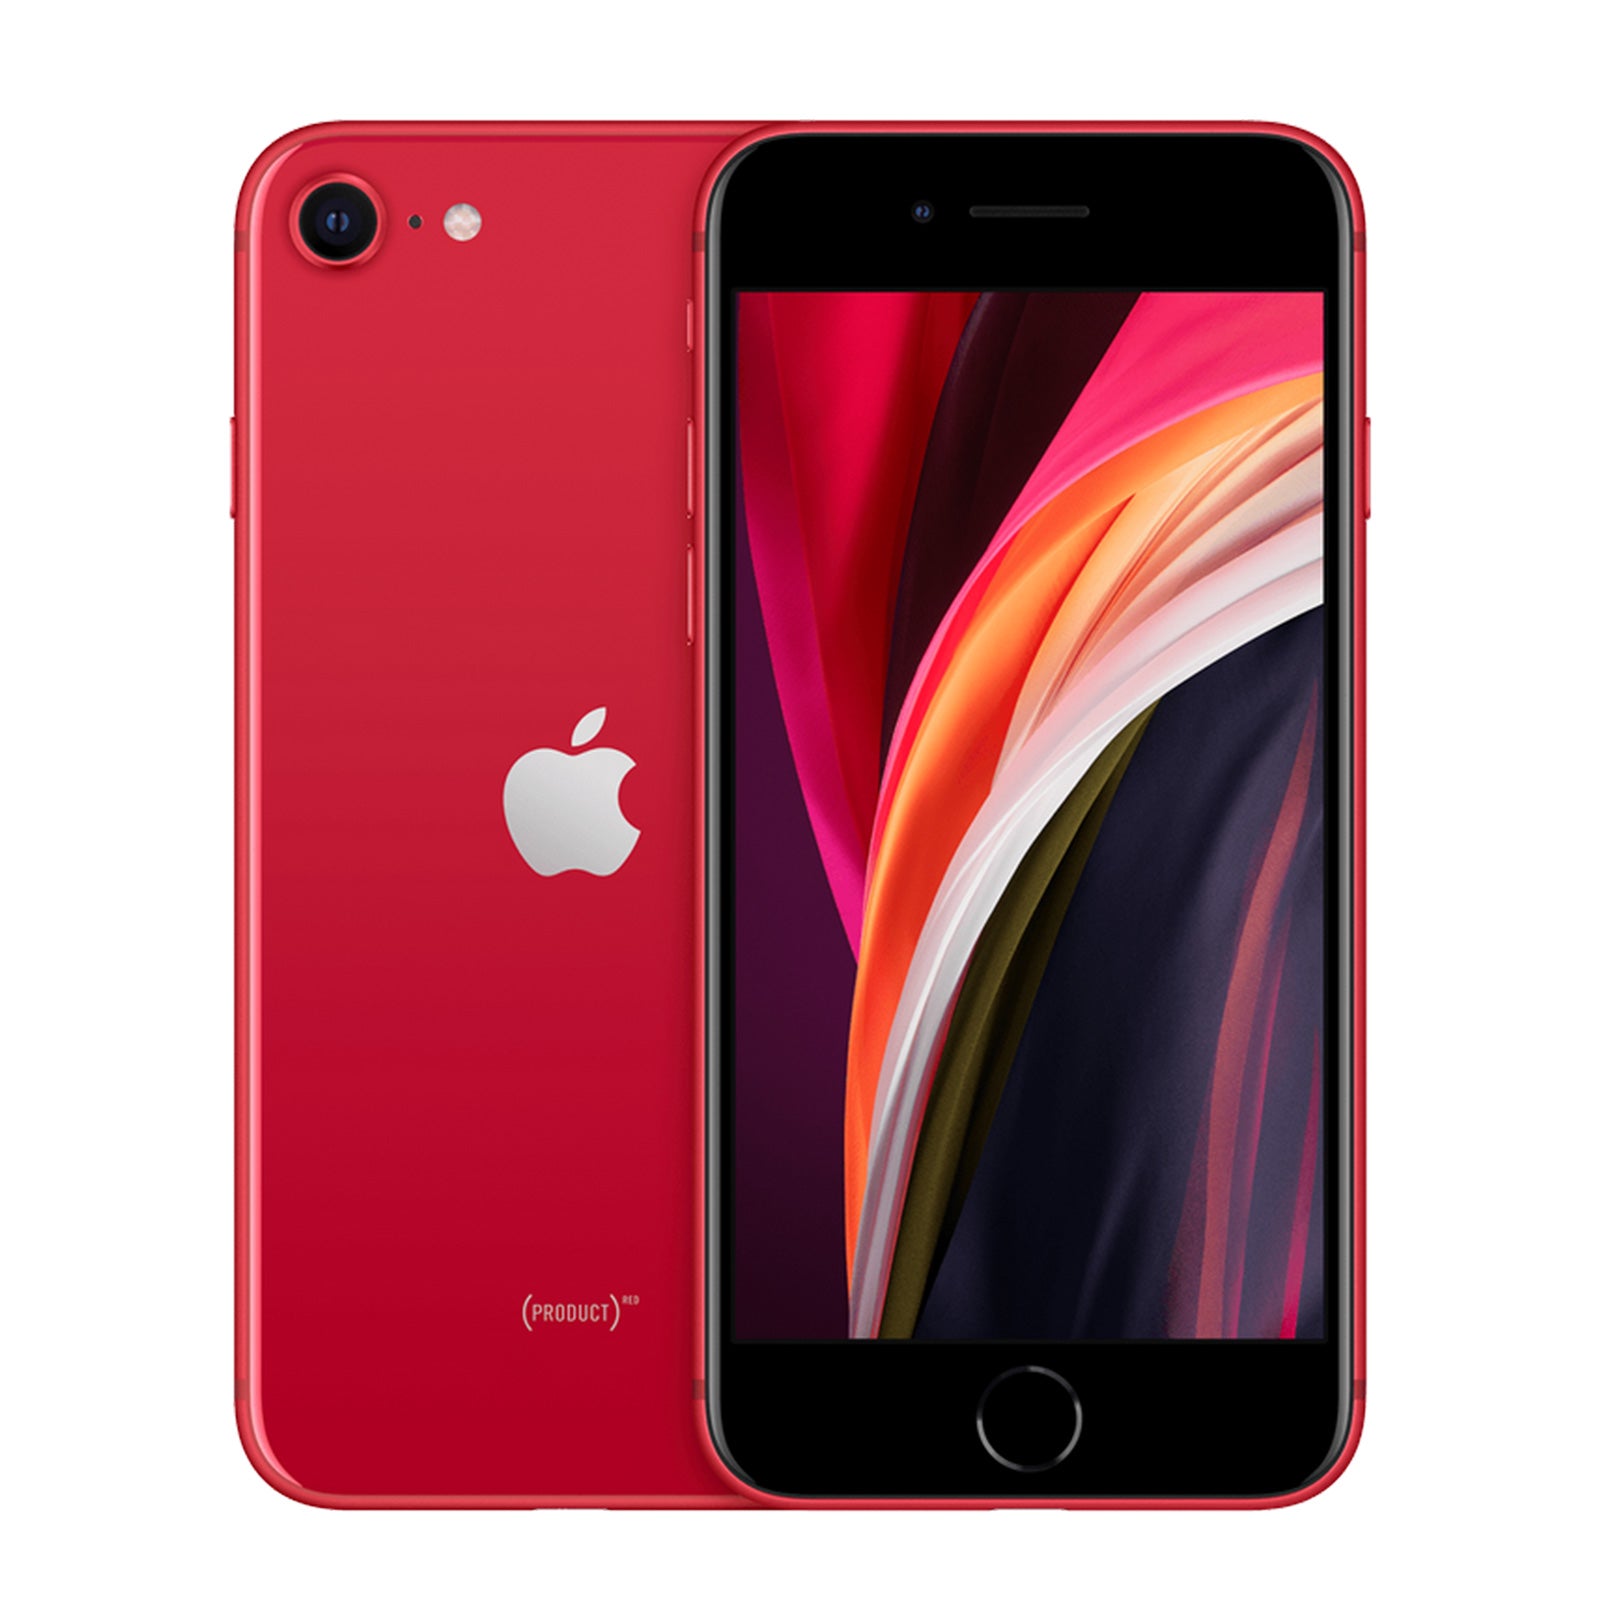 Apple iPhone SE 2nd Gen 128GB Product Red Fair Sprint